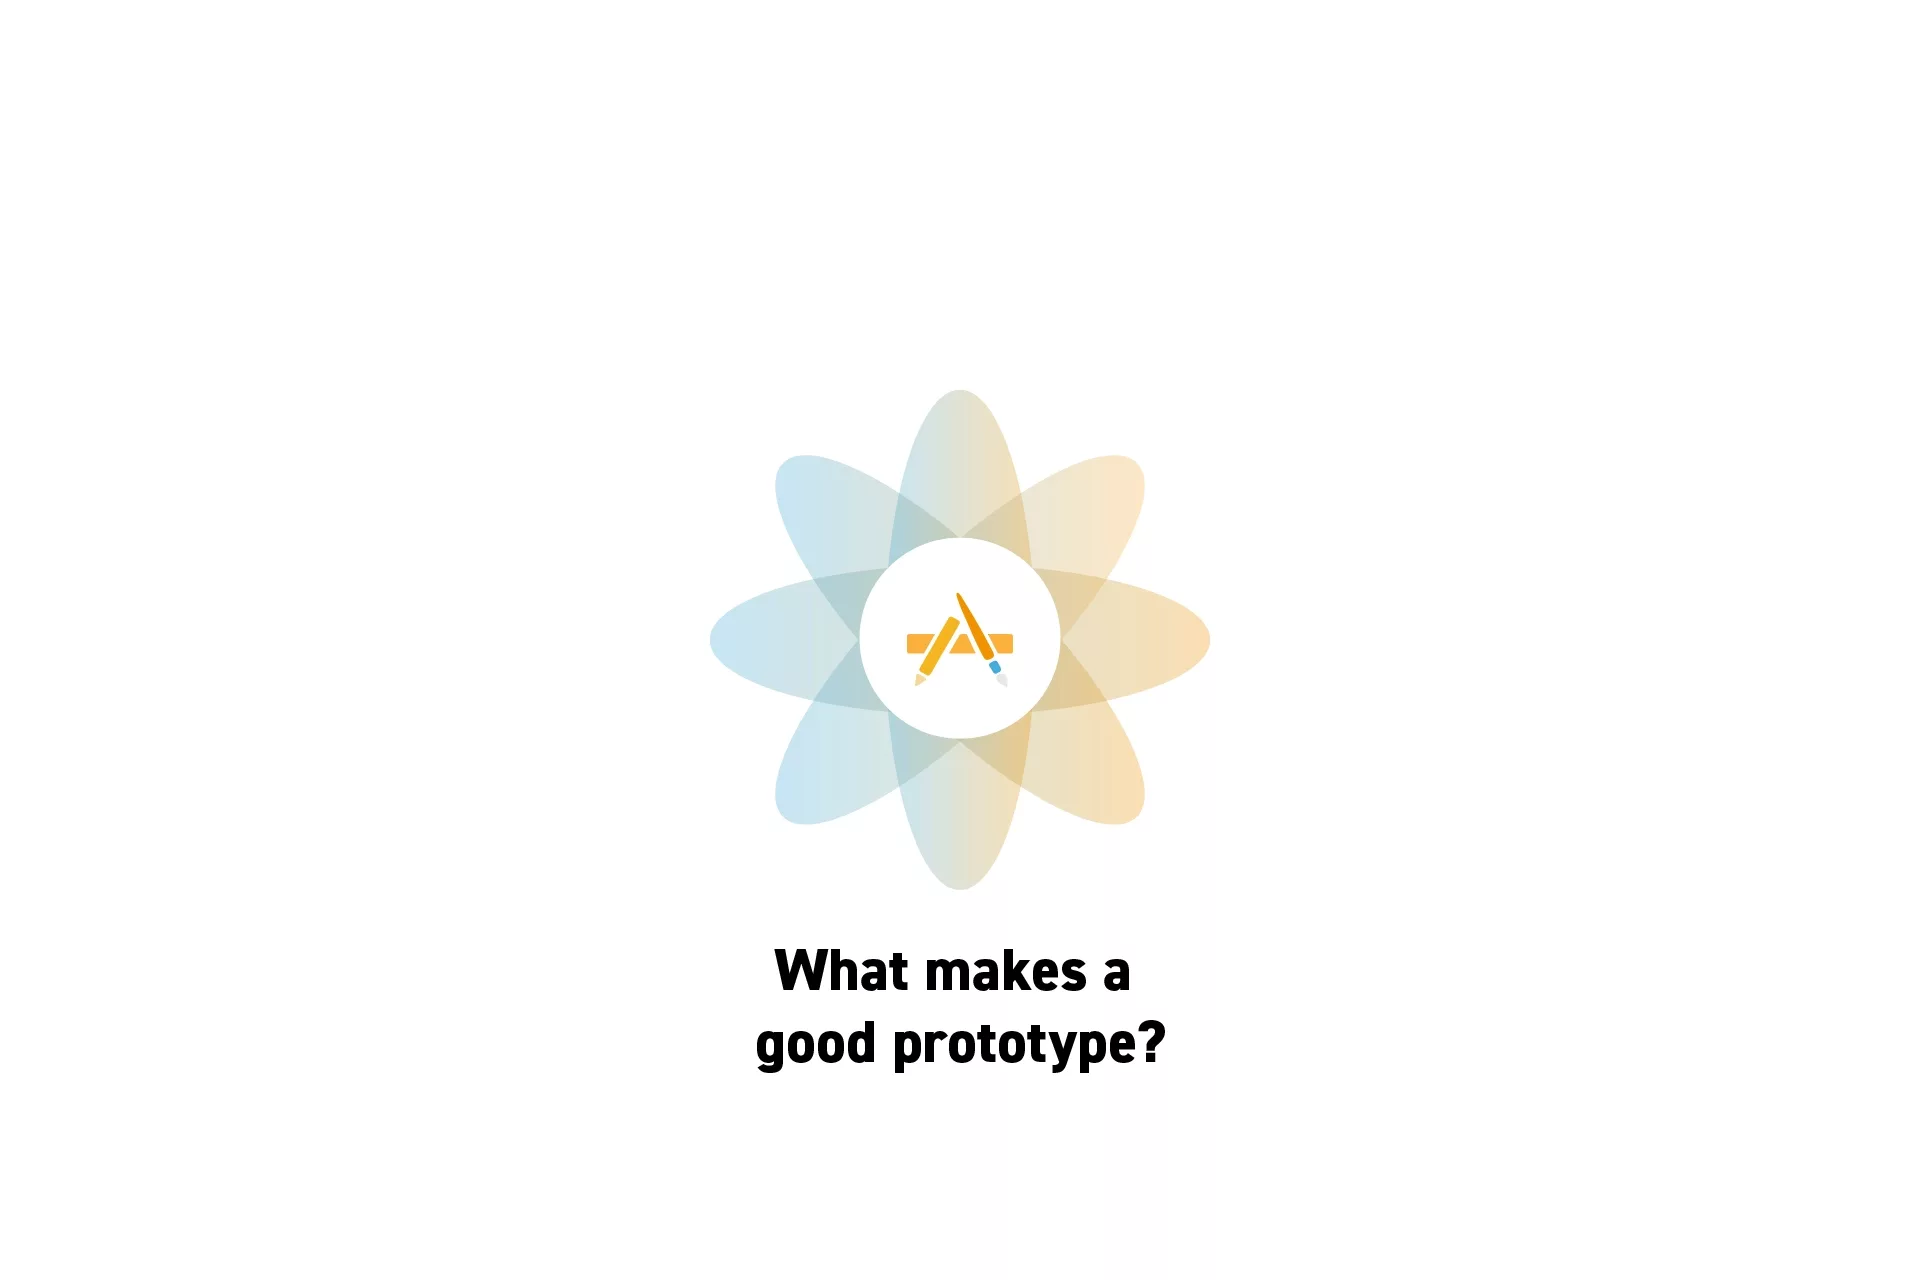 A flower that represents Digital Craft with the text “What makes a good prototype?” beneath it.